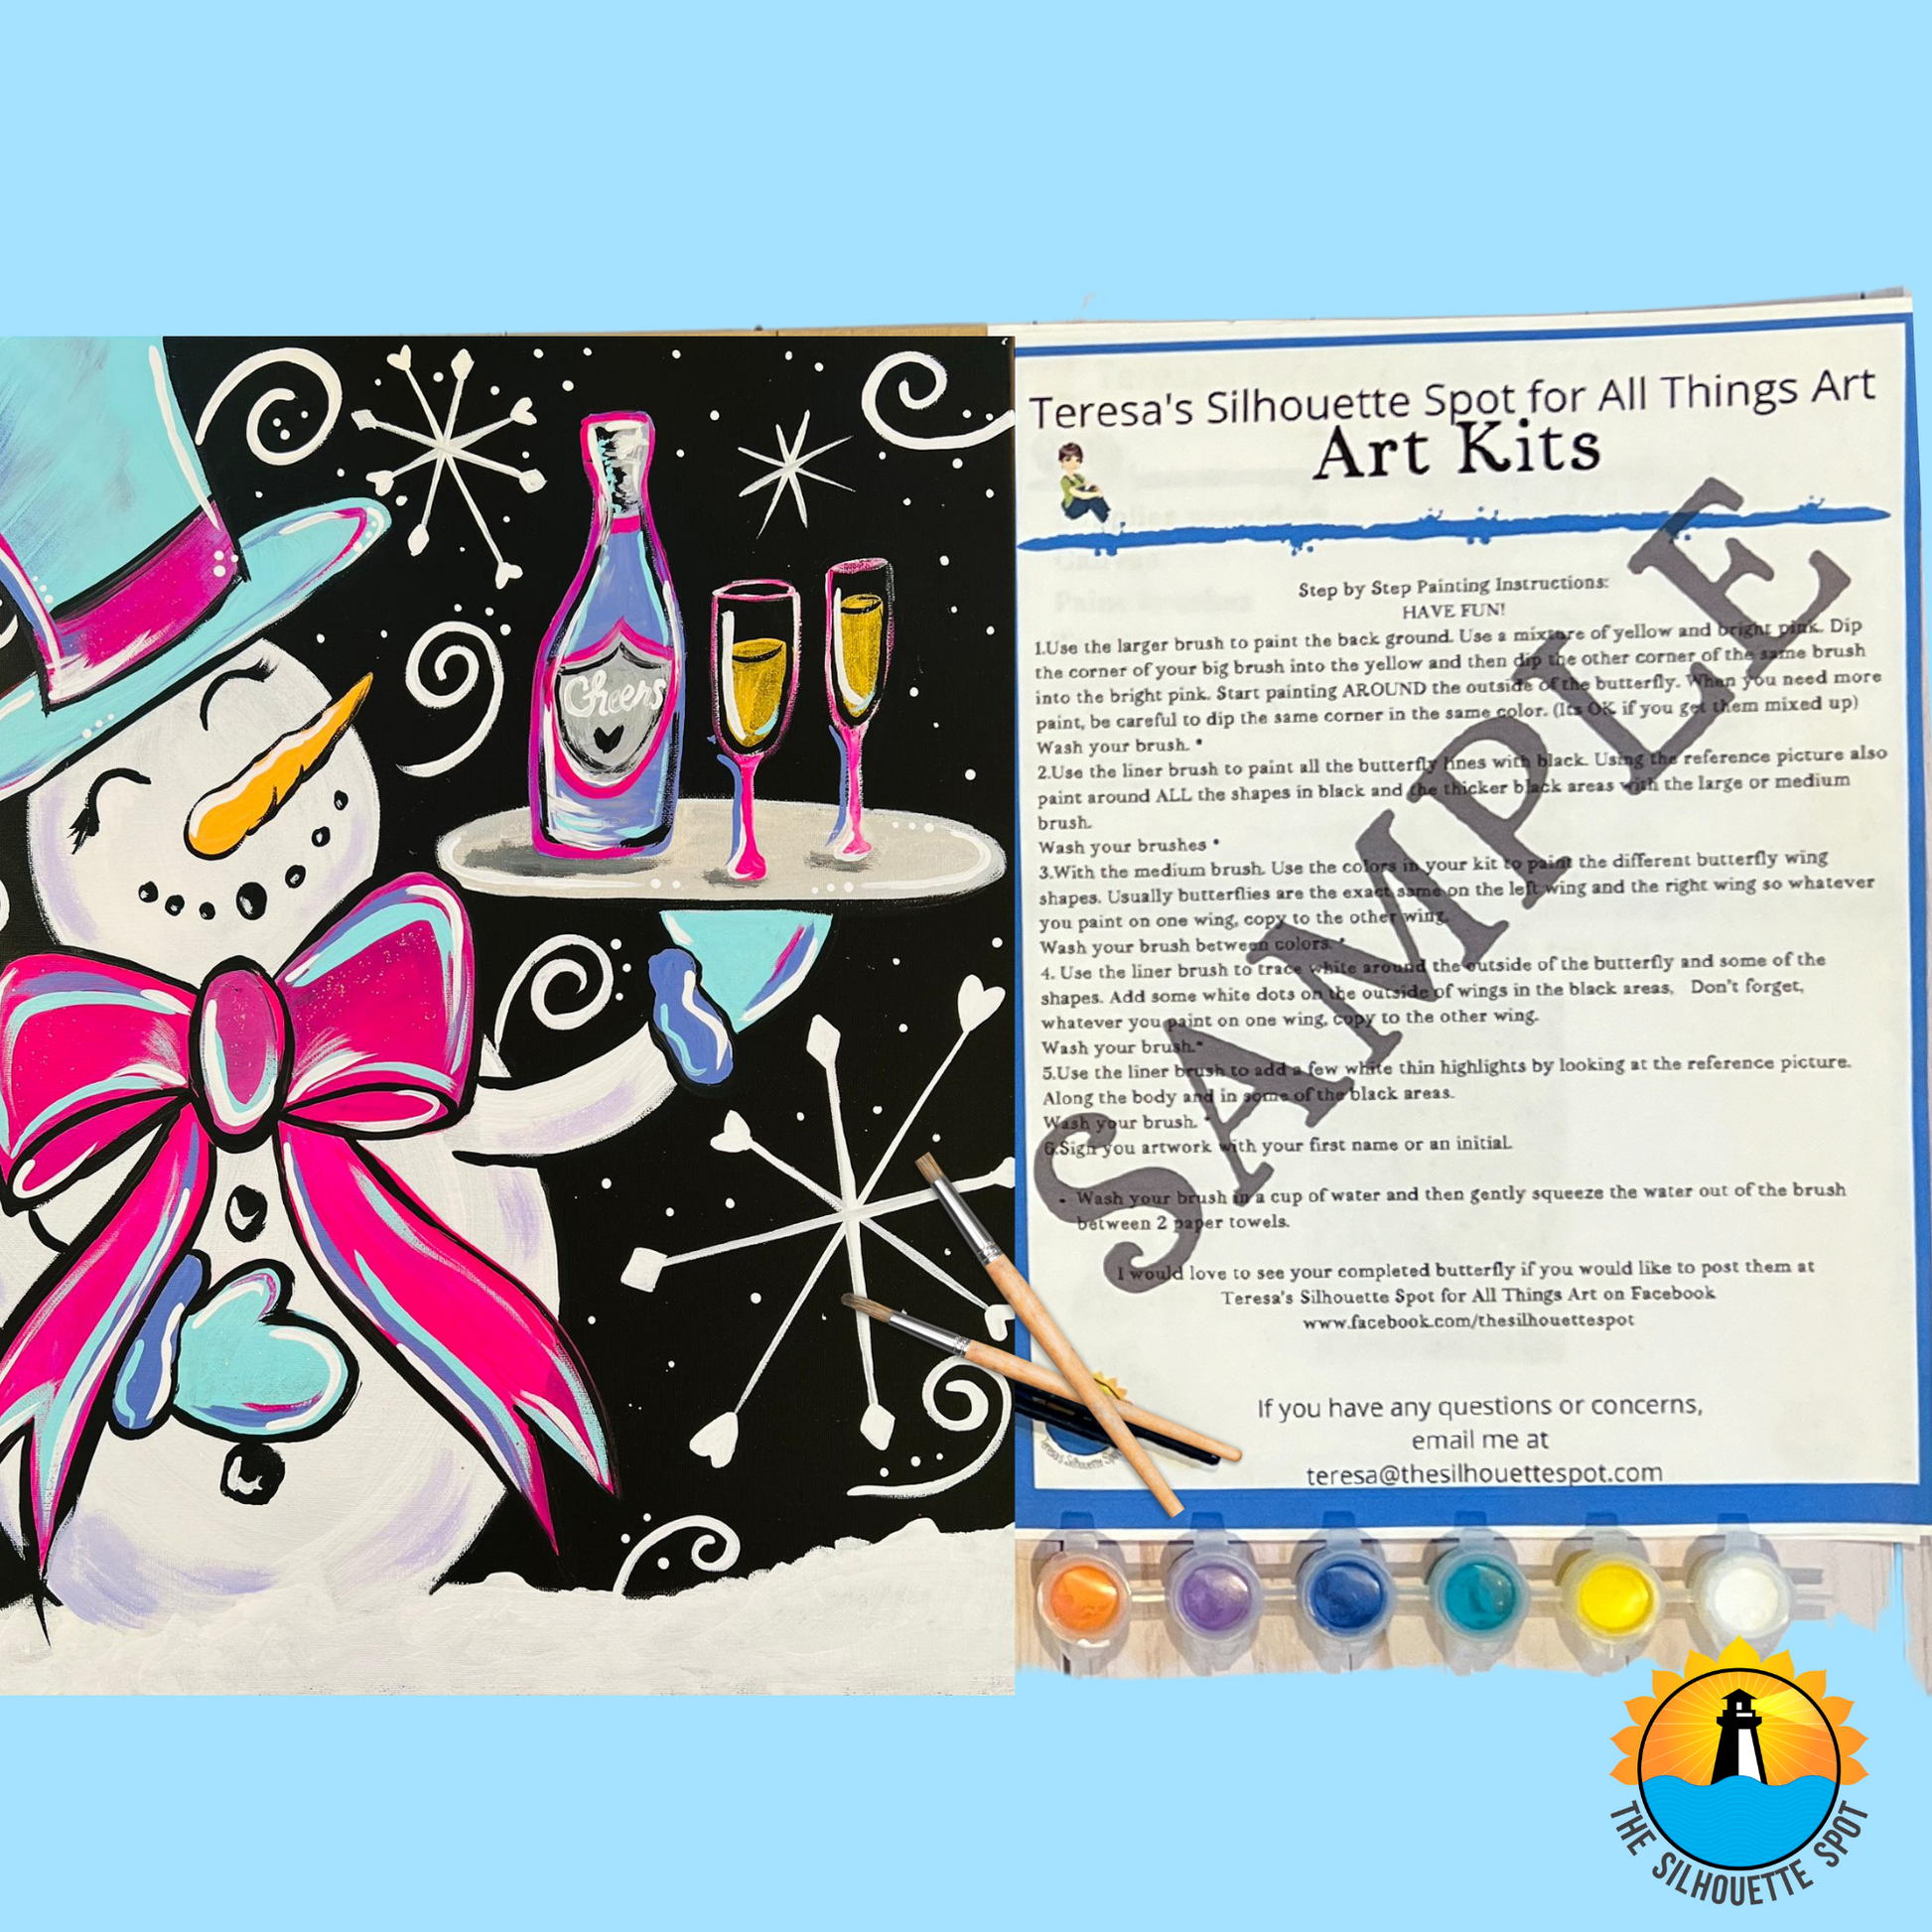 New Year's Eve Snowman Art Party Kit! At Home Paint Party Supplies